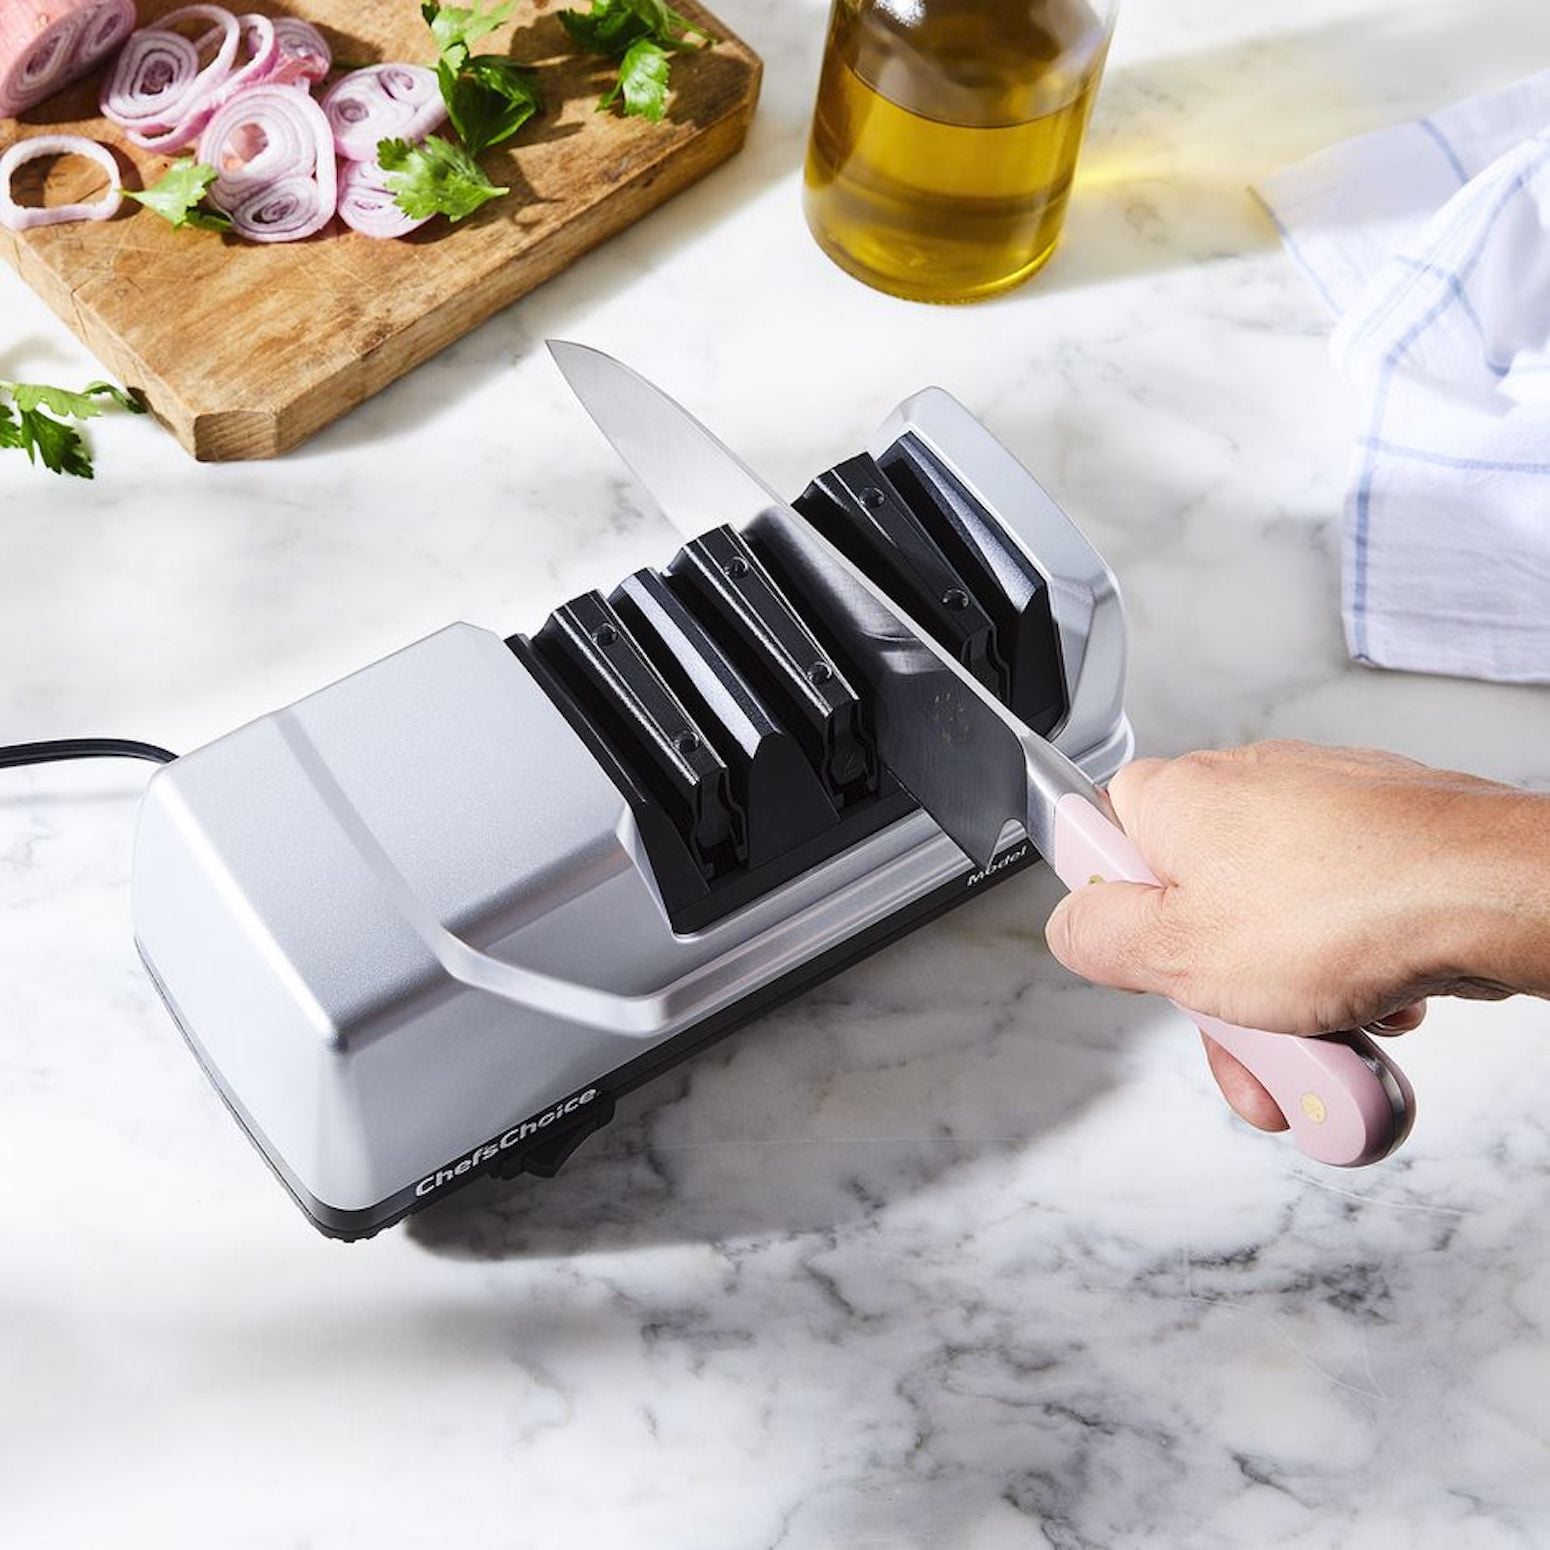 18 Kitchen Gadgets Pro Cooks Use at Home (and Most Are $20 or Less!)